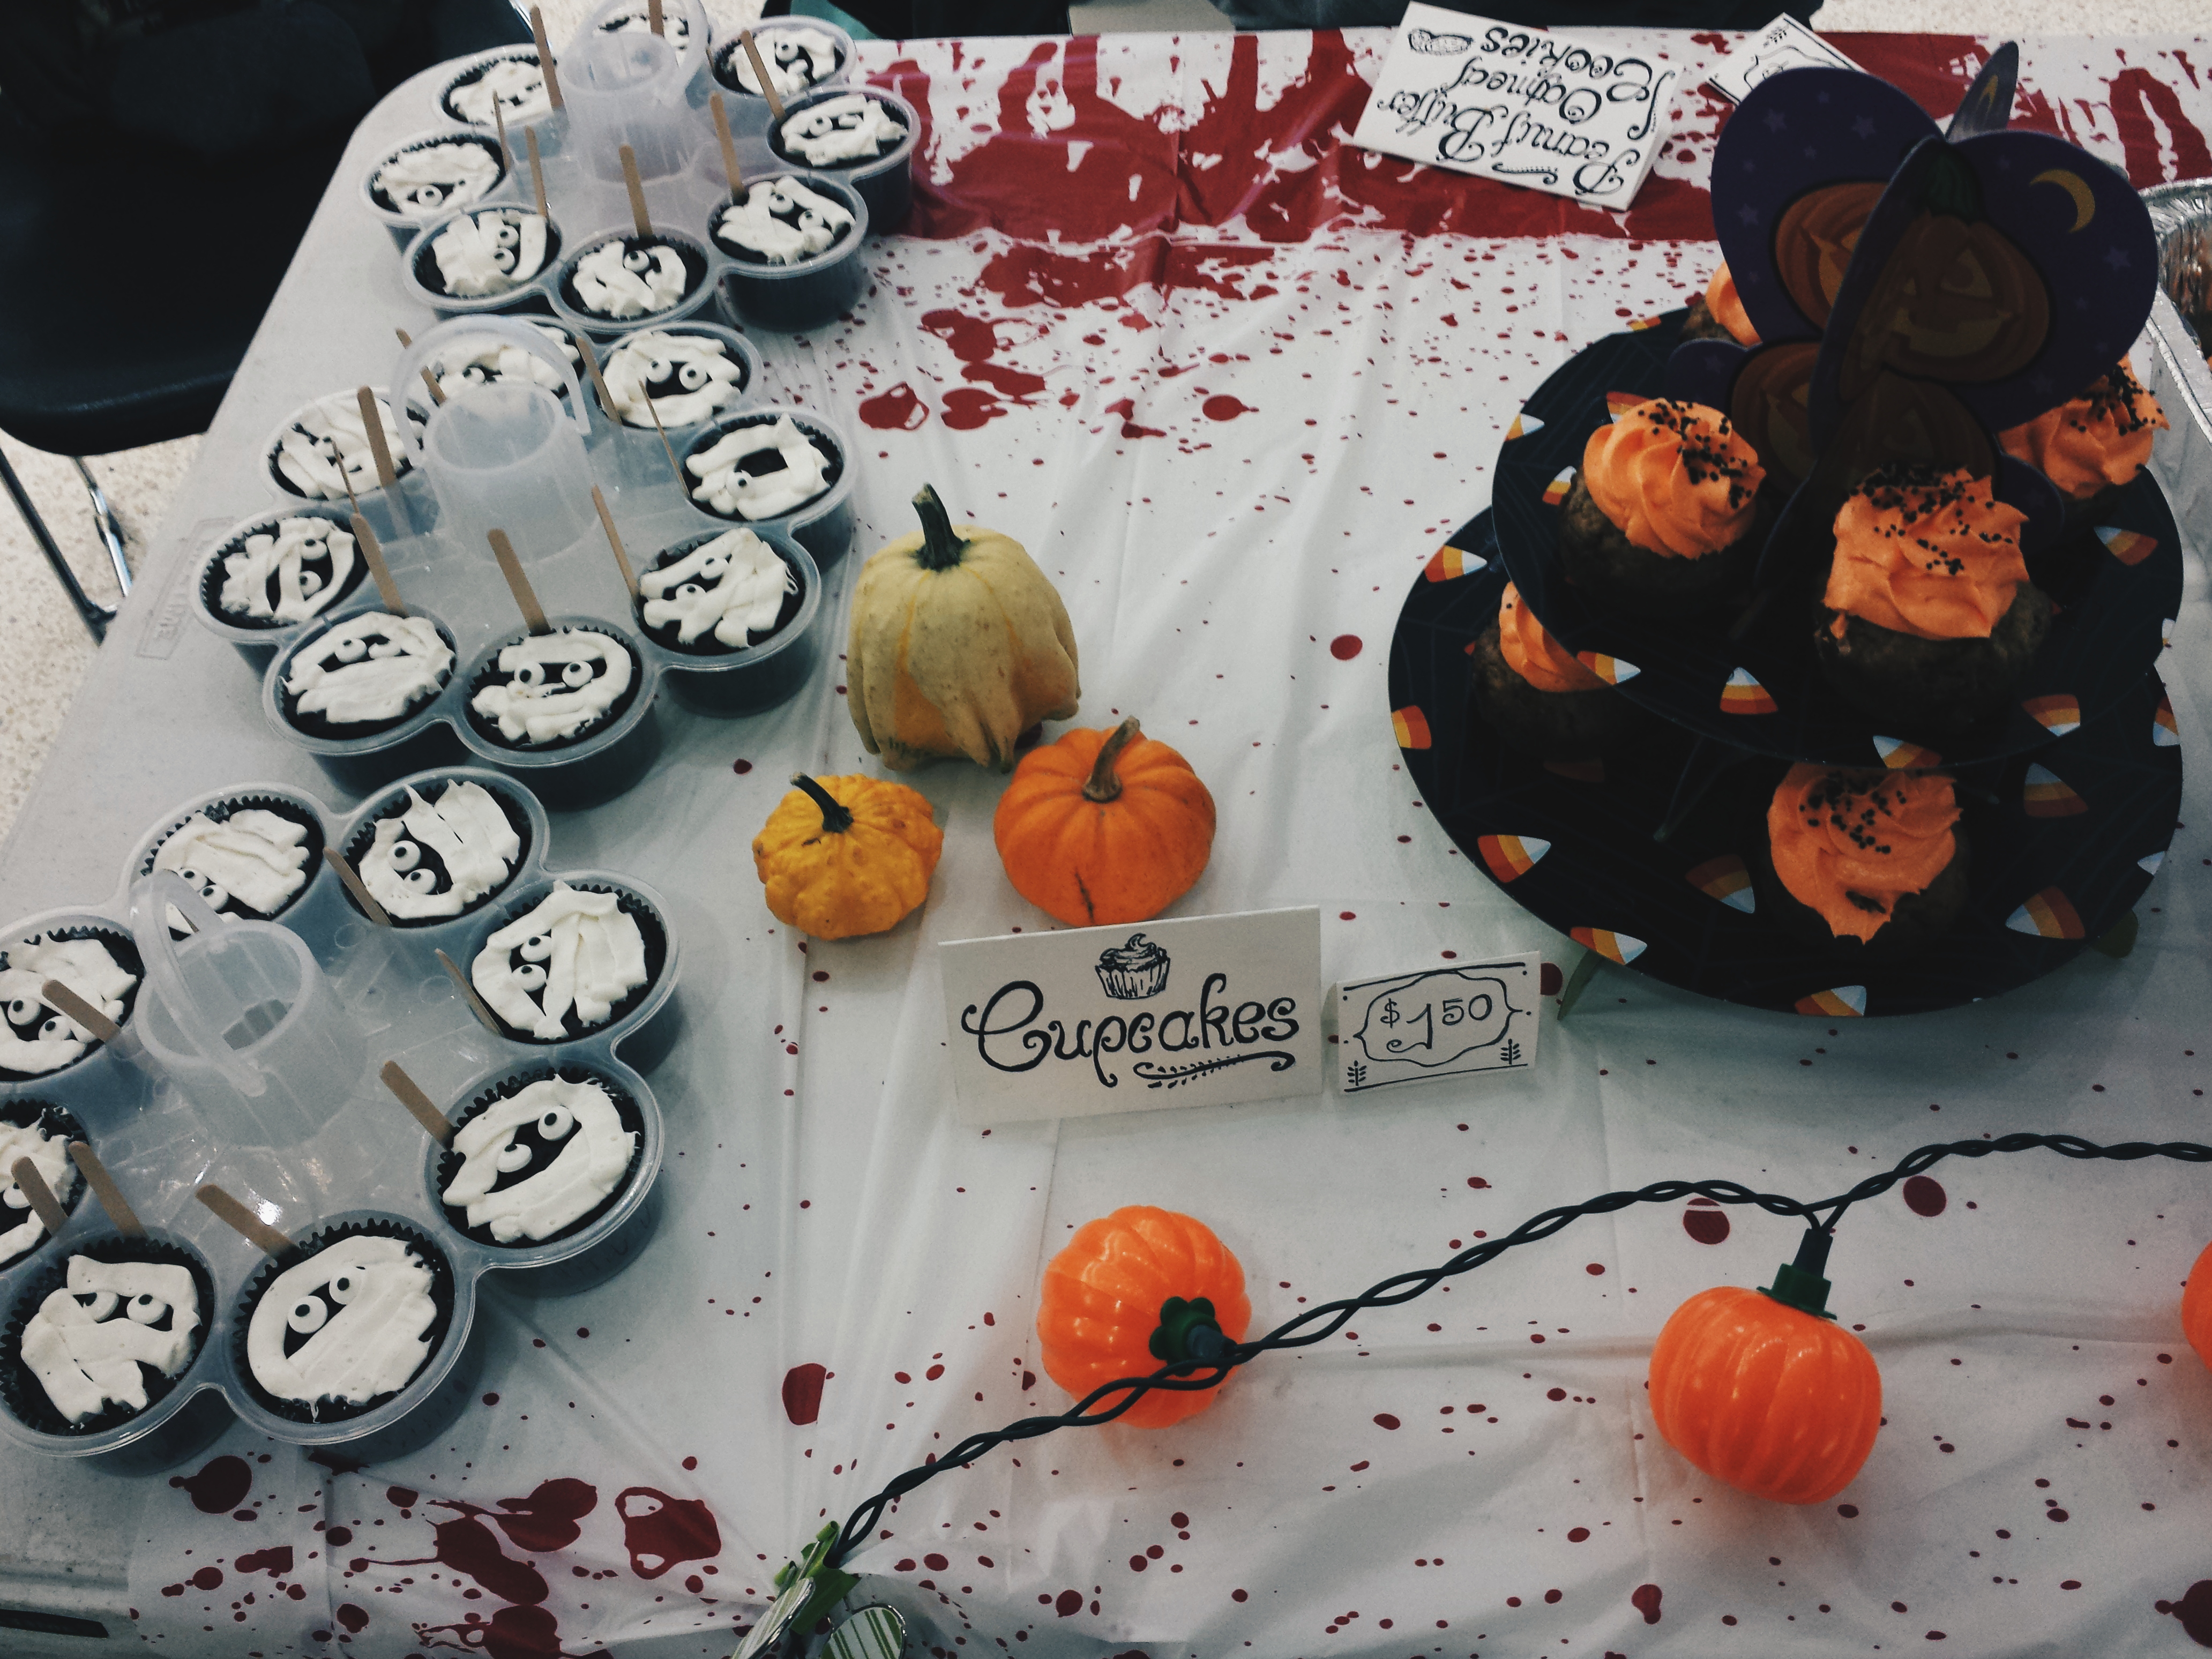 A table for a Halloween-themed bake sale, complete with a string of pumpkin lights, a blood-spattered tablecloth, and chocolate muffins decorated with white icing to look like mummies!